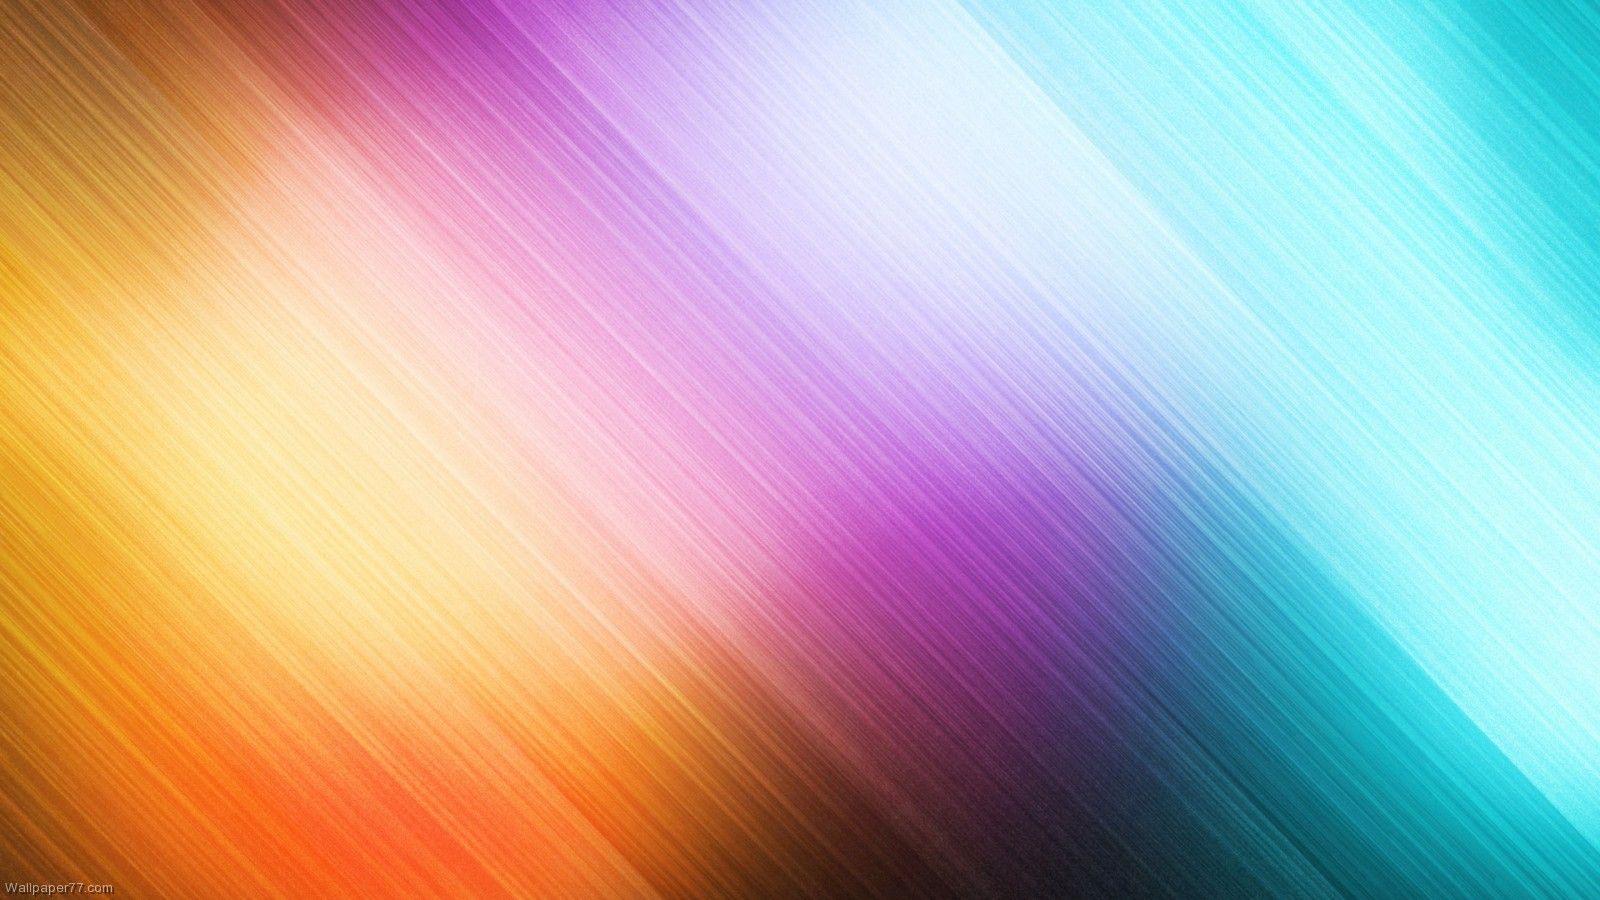 Aero Background in Abstract